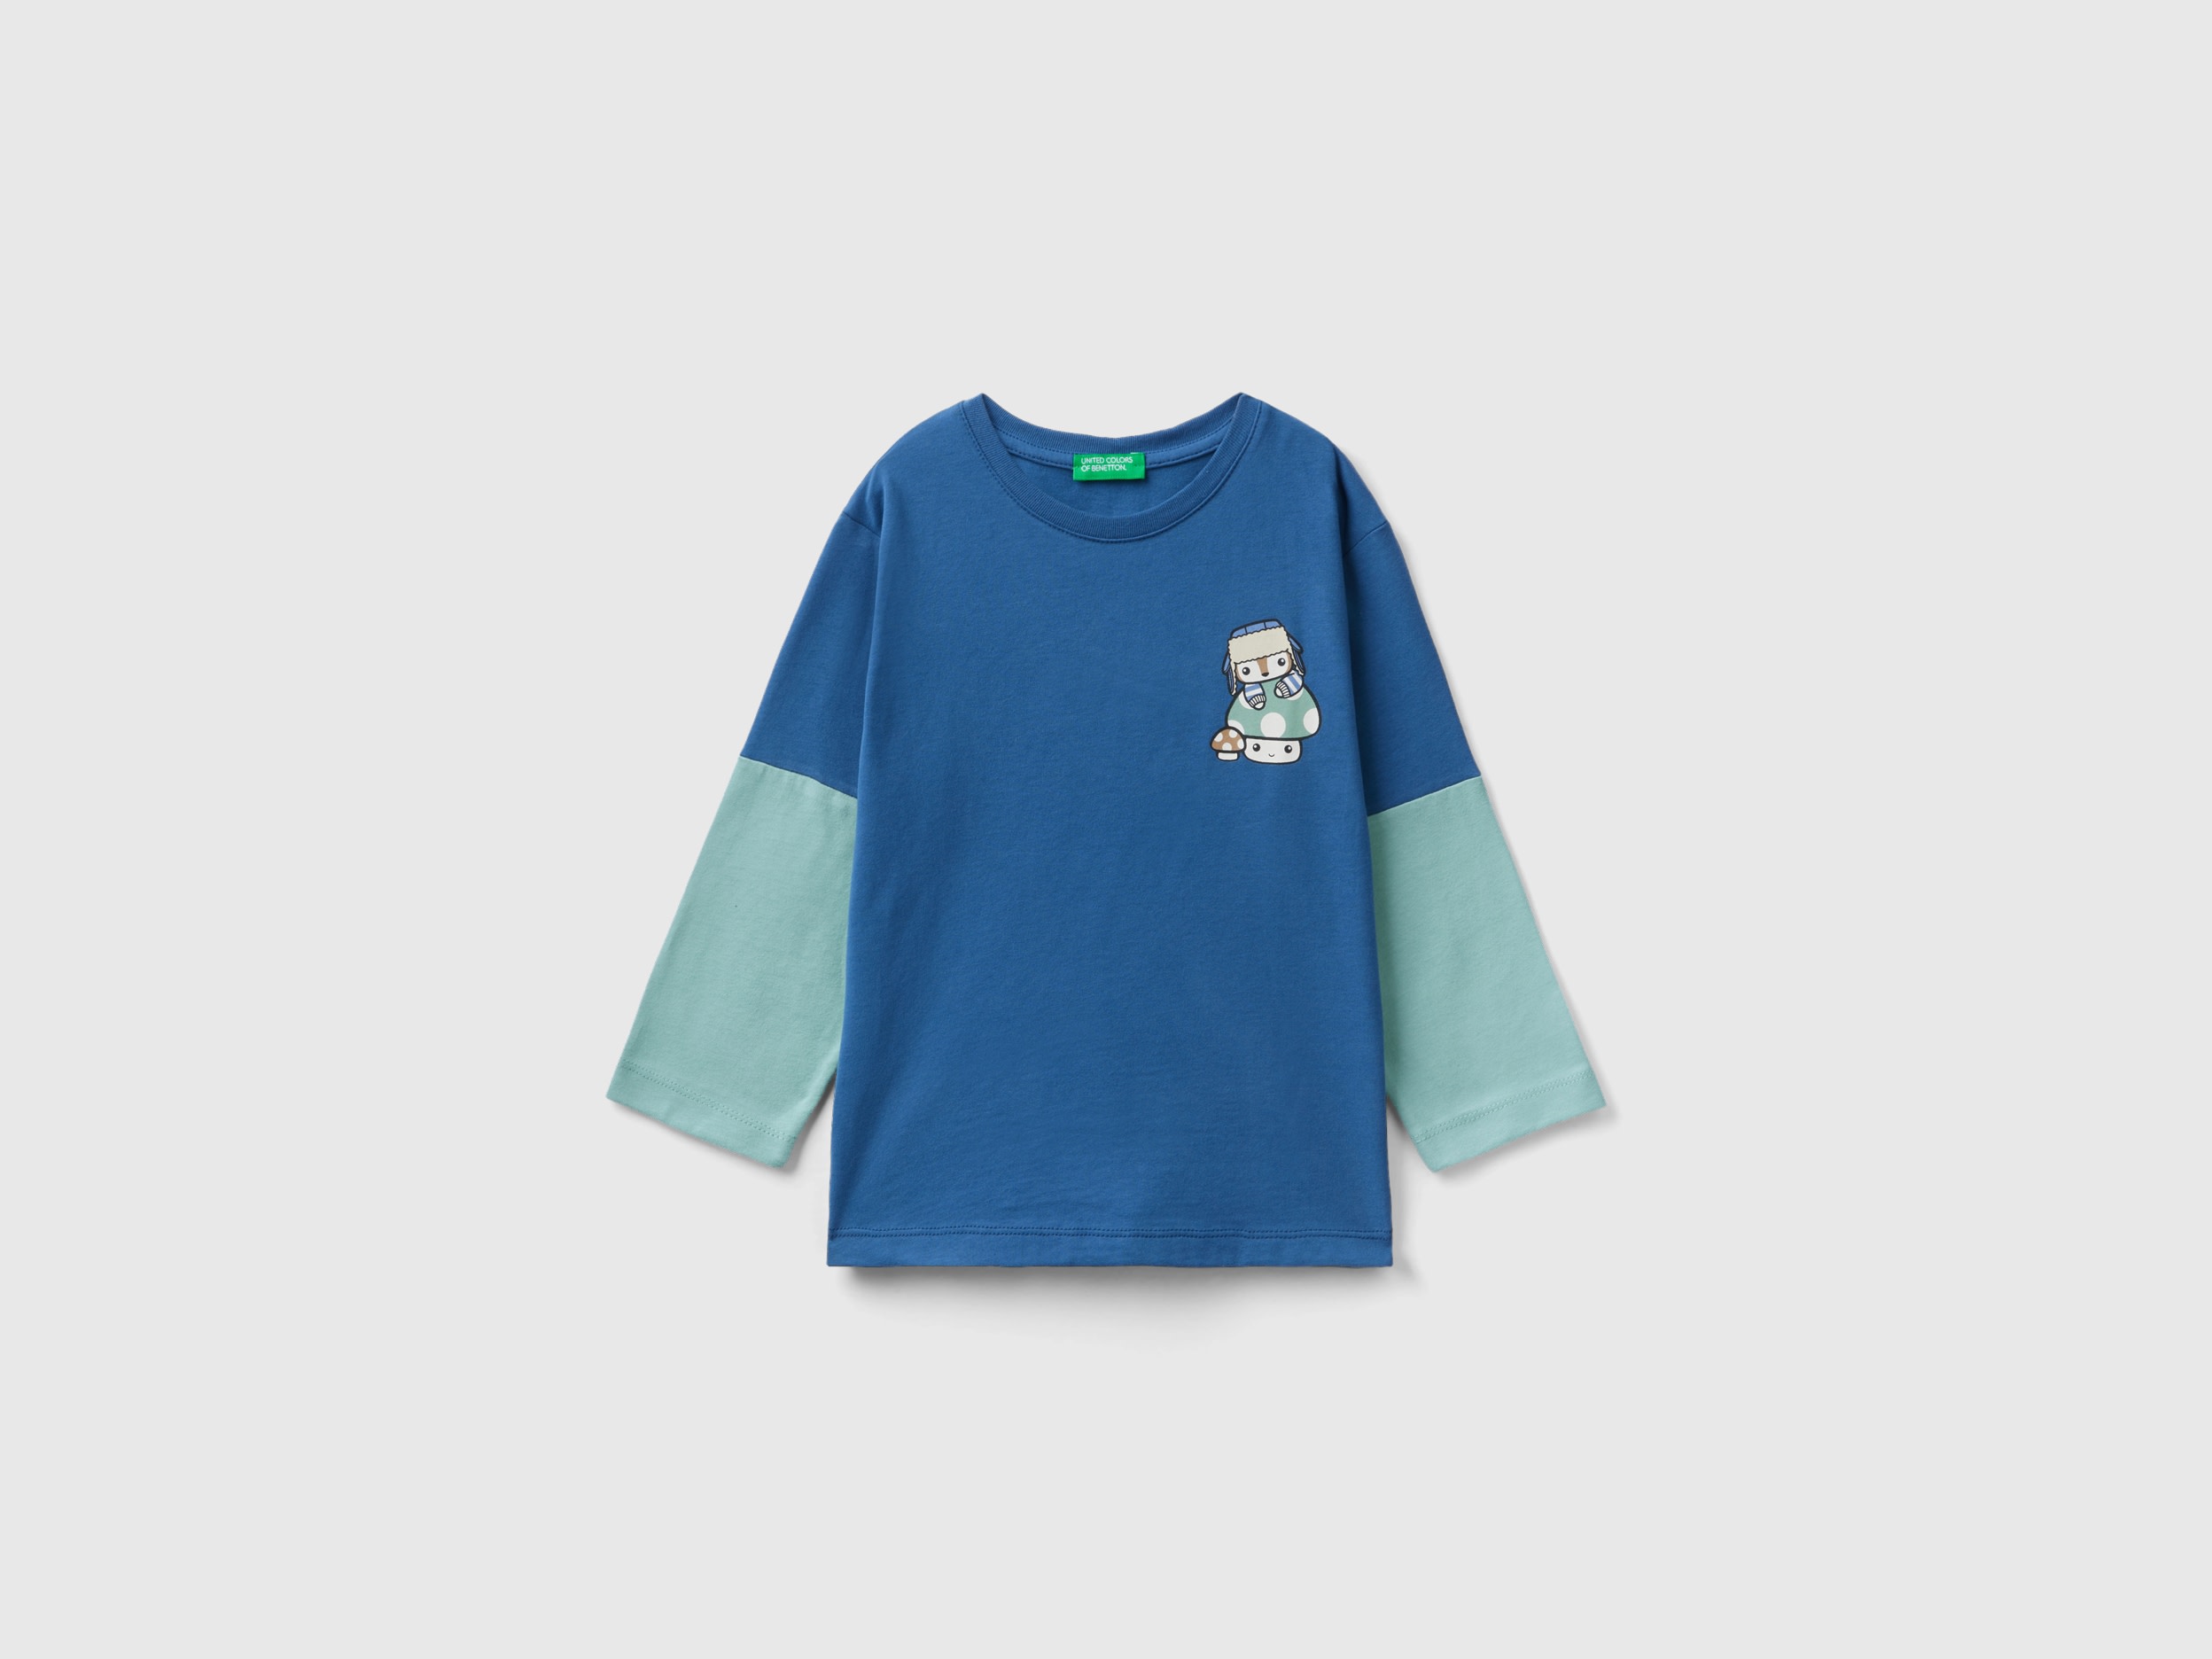 Benetton, Warm T-shirt With Print, size 5-6, Air Force Blue, Kids